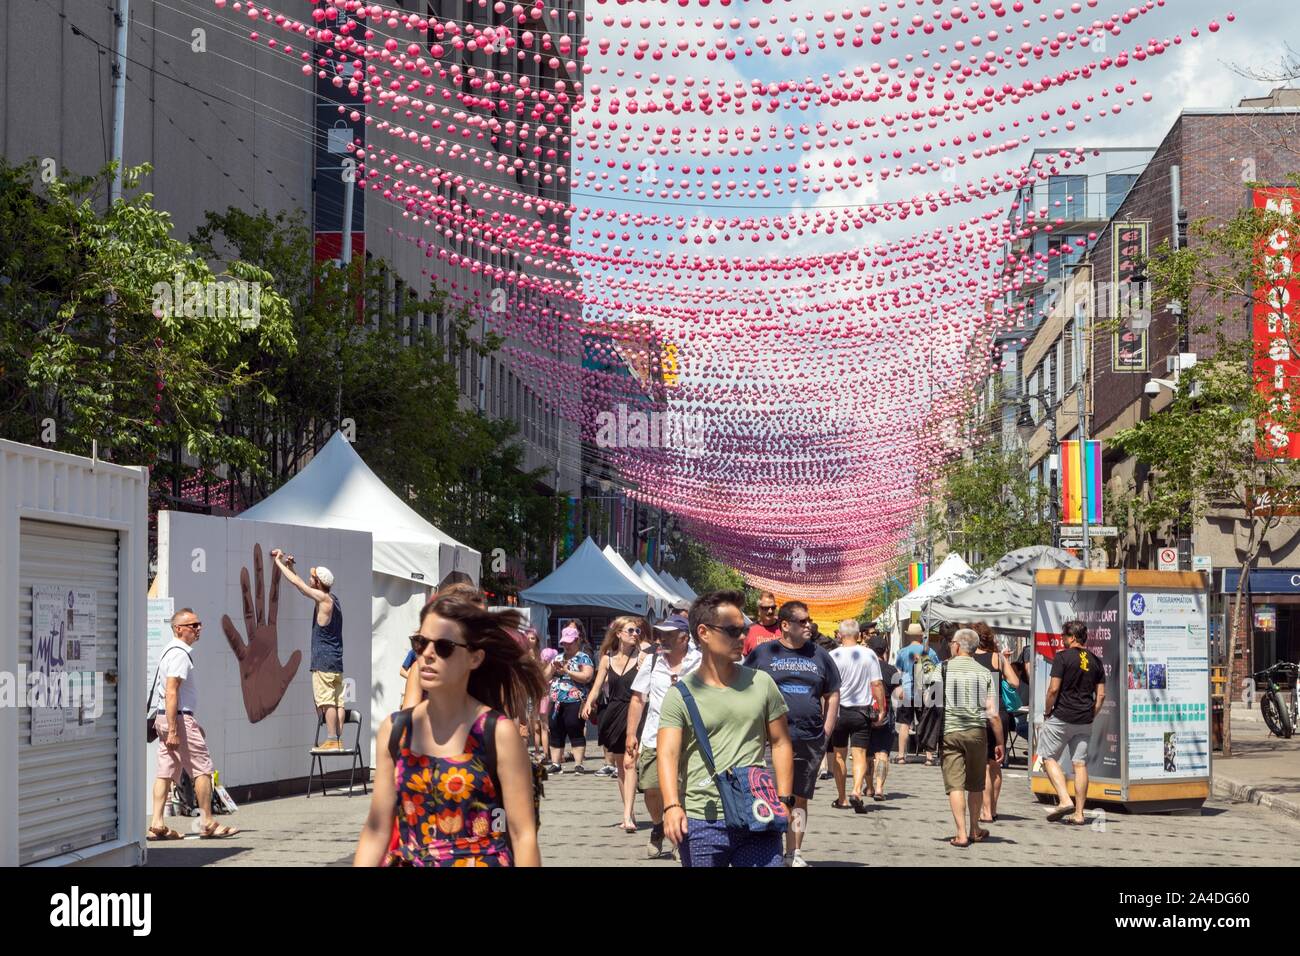 NEIGHBORHOOD OF THE GAY VILLAGE RESERVED FOR PEDESTRIANS IN SUMMER AND DECORATED IN THE COLORS OF THE RAINBOW, RUE SAINTE-CATHERINE, MONTREAL, QUEBEC, CANADA Stock Photo